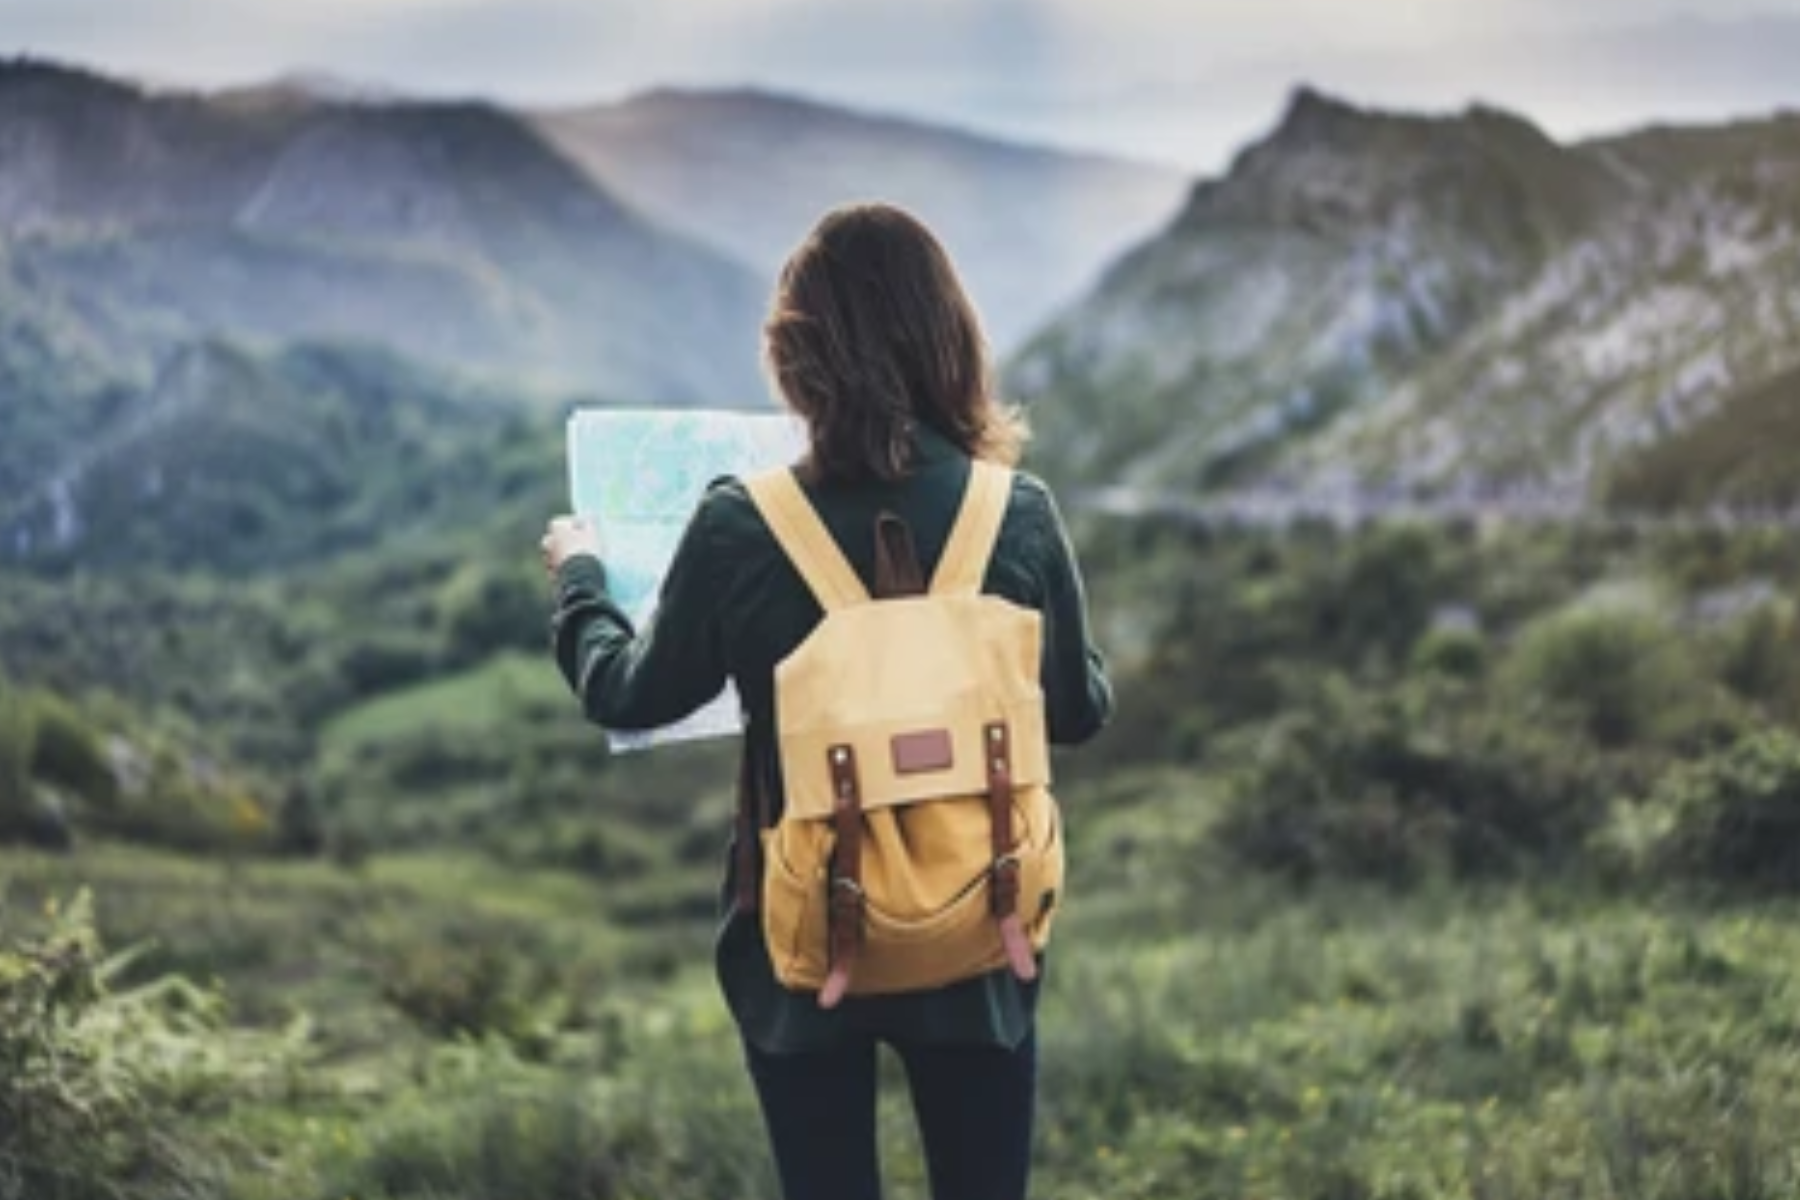 In front of huge mountains, a woman traveling with her backpack and a map